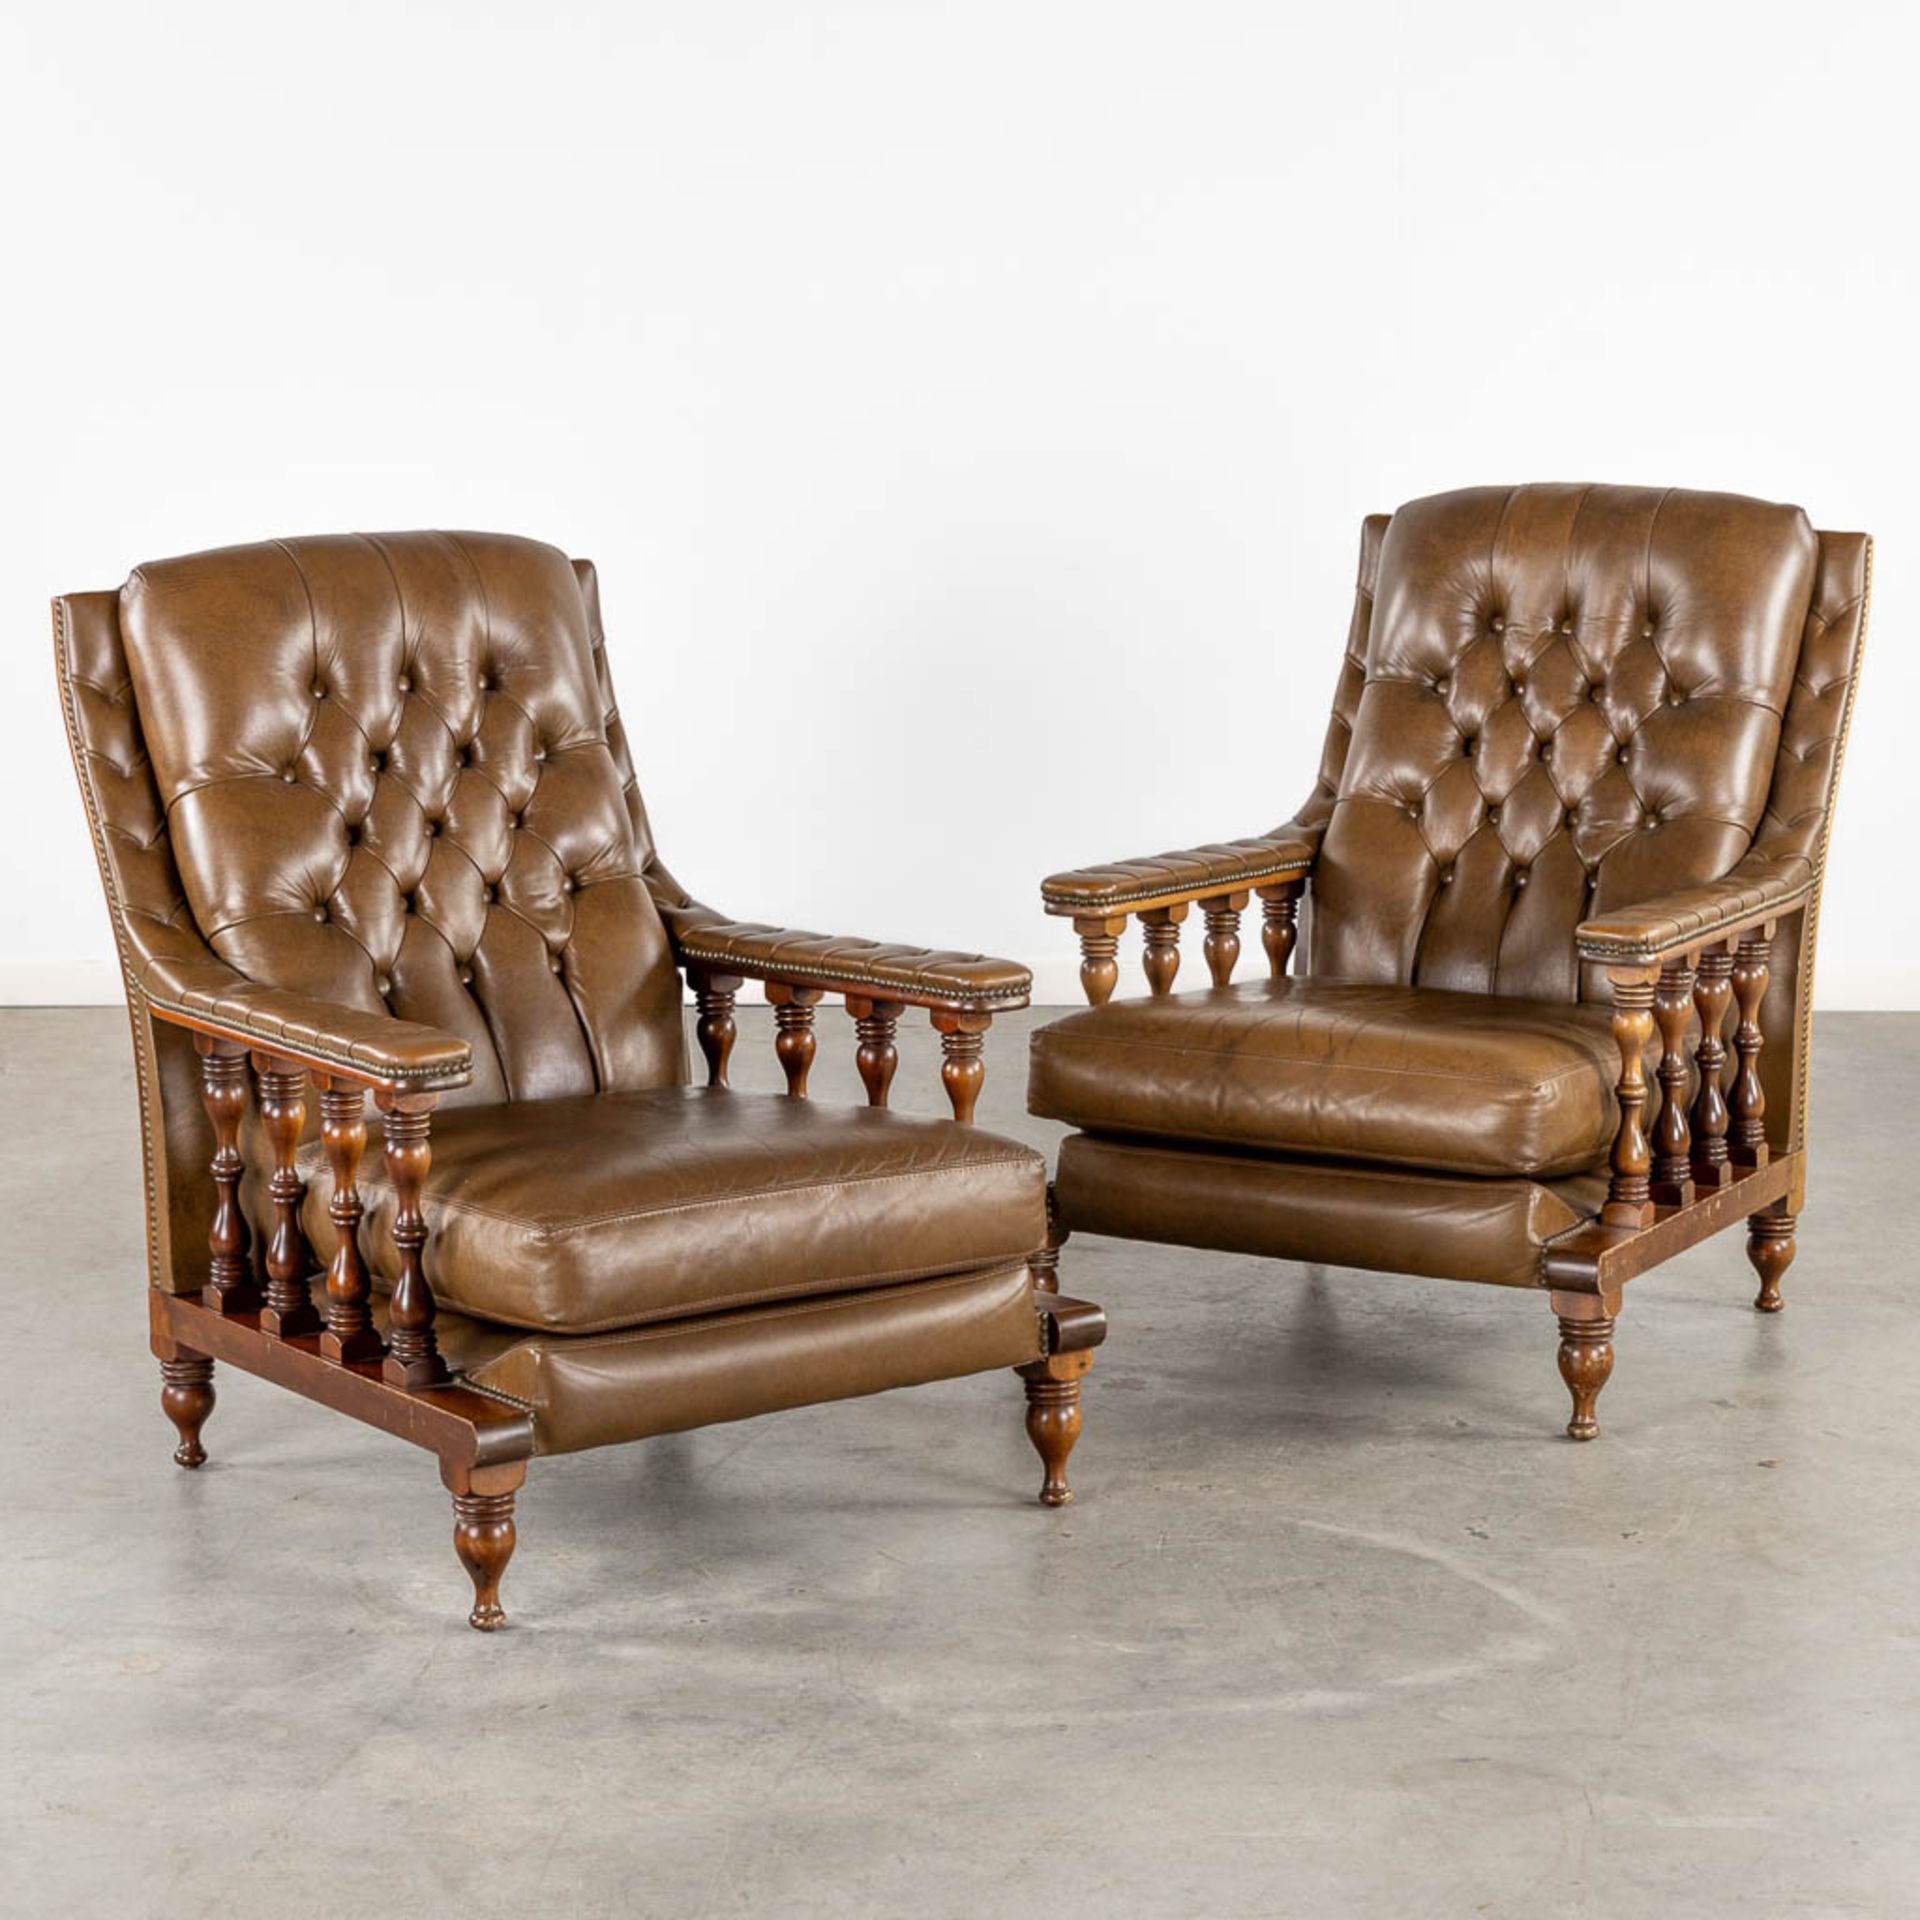 A pair of relax chairs, leather and wood in Chesterfield style. (L:83 x W:74 x H:95 cm)